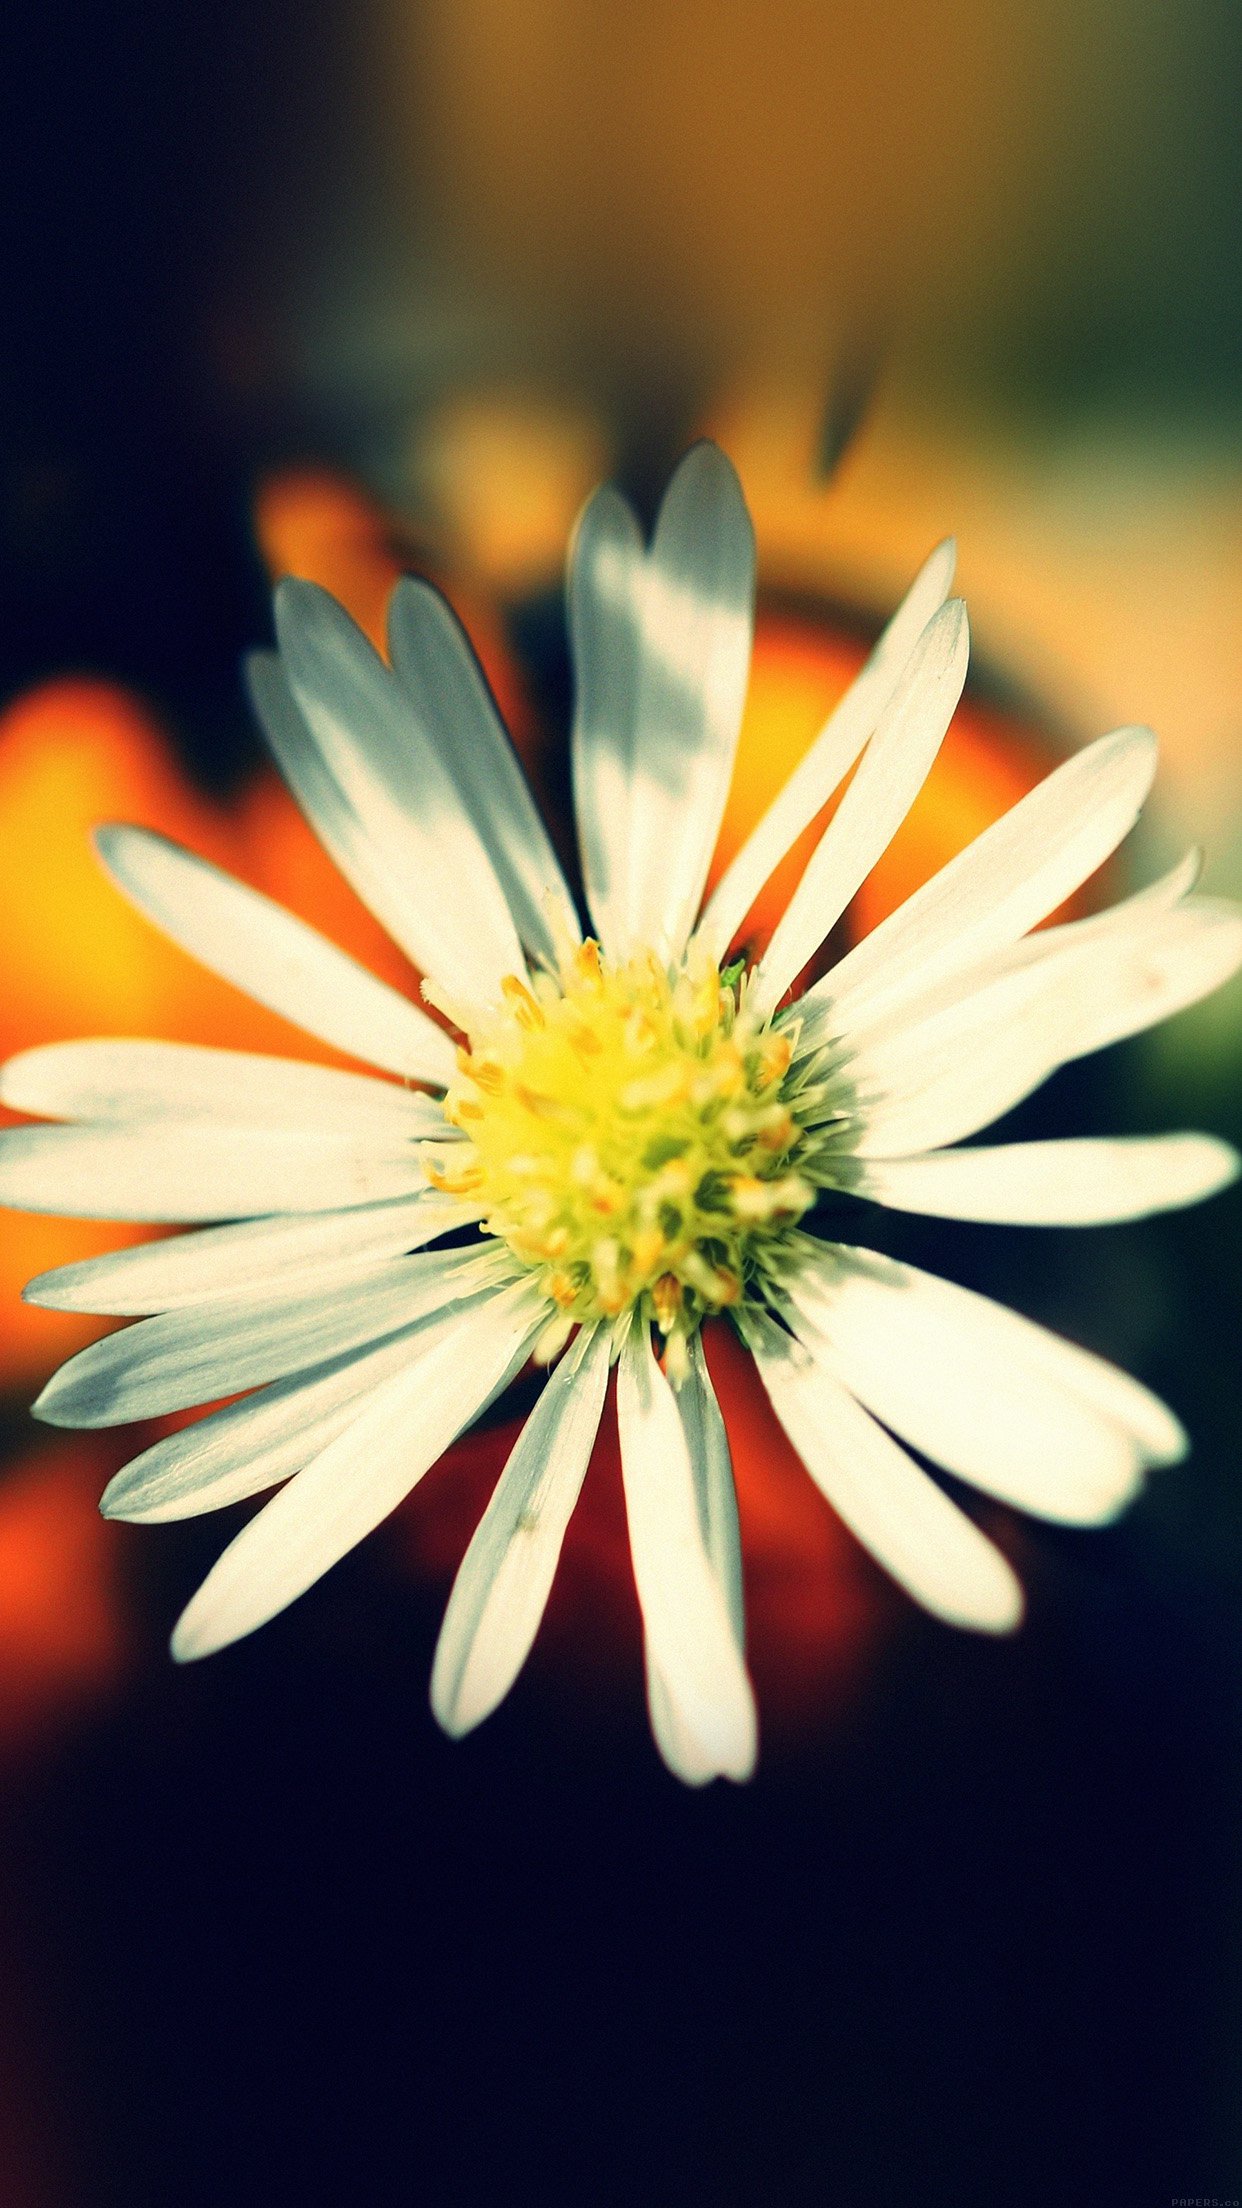 White Flower Nature Android wallpaper